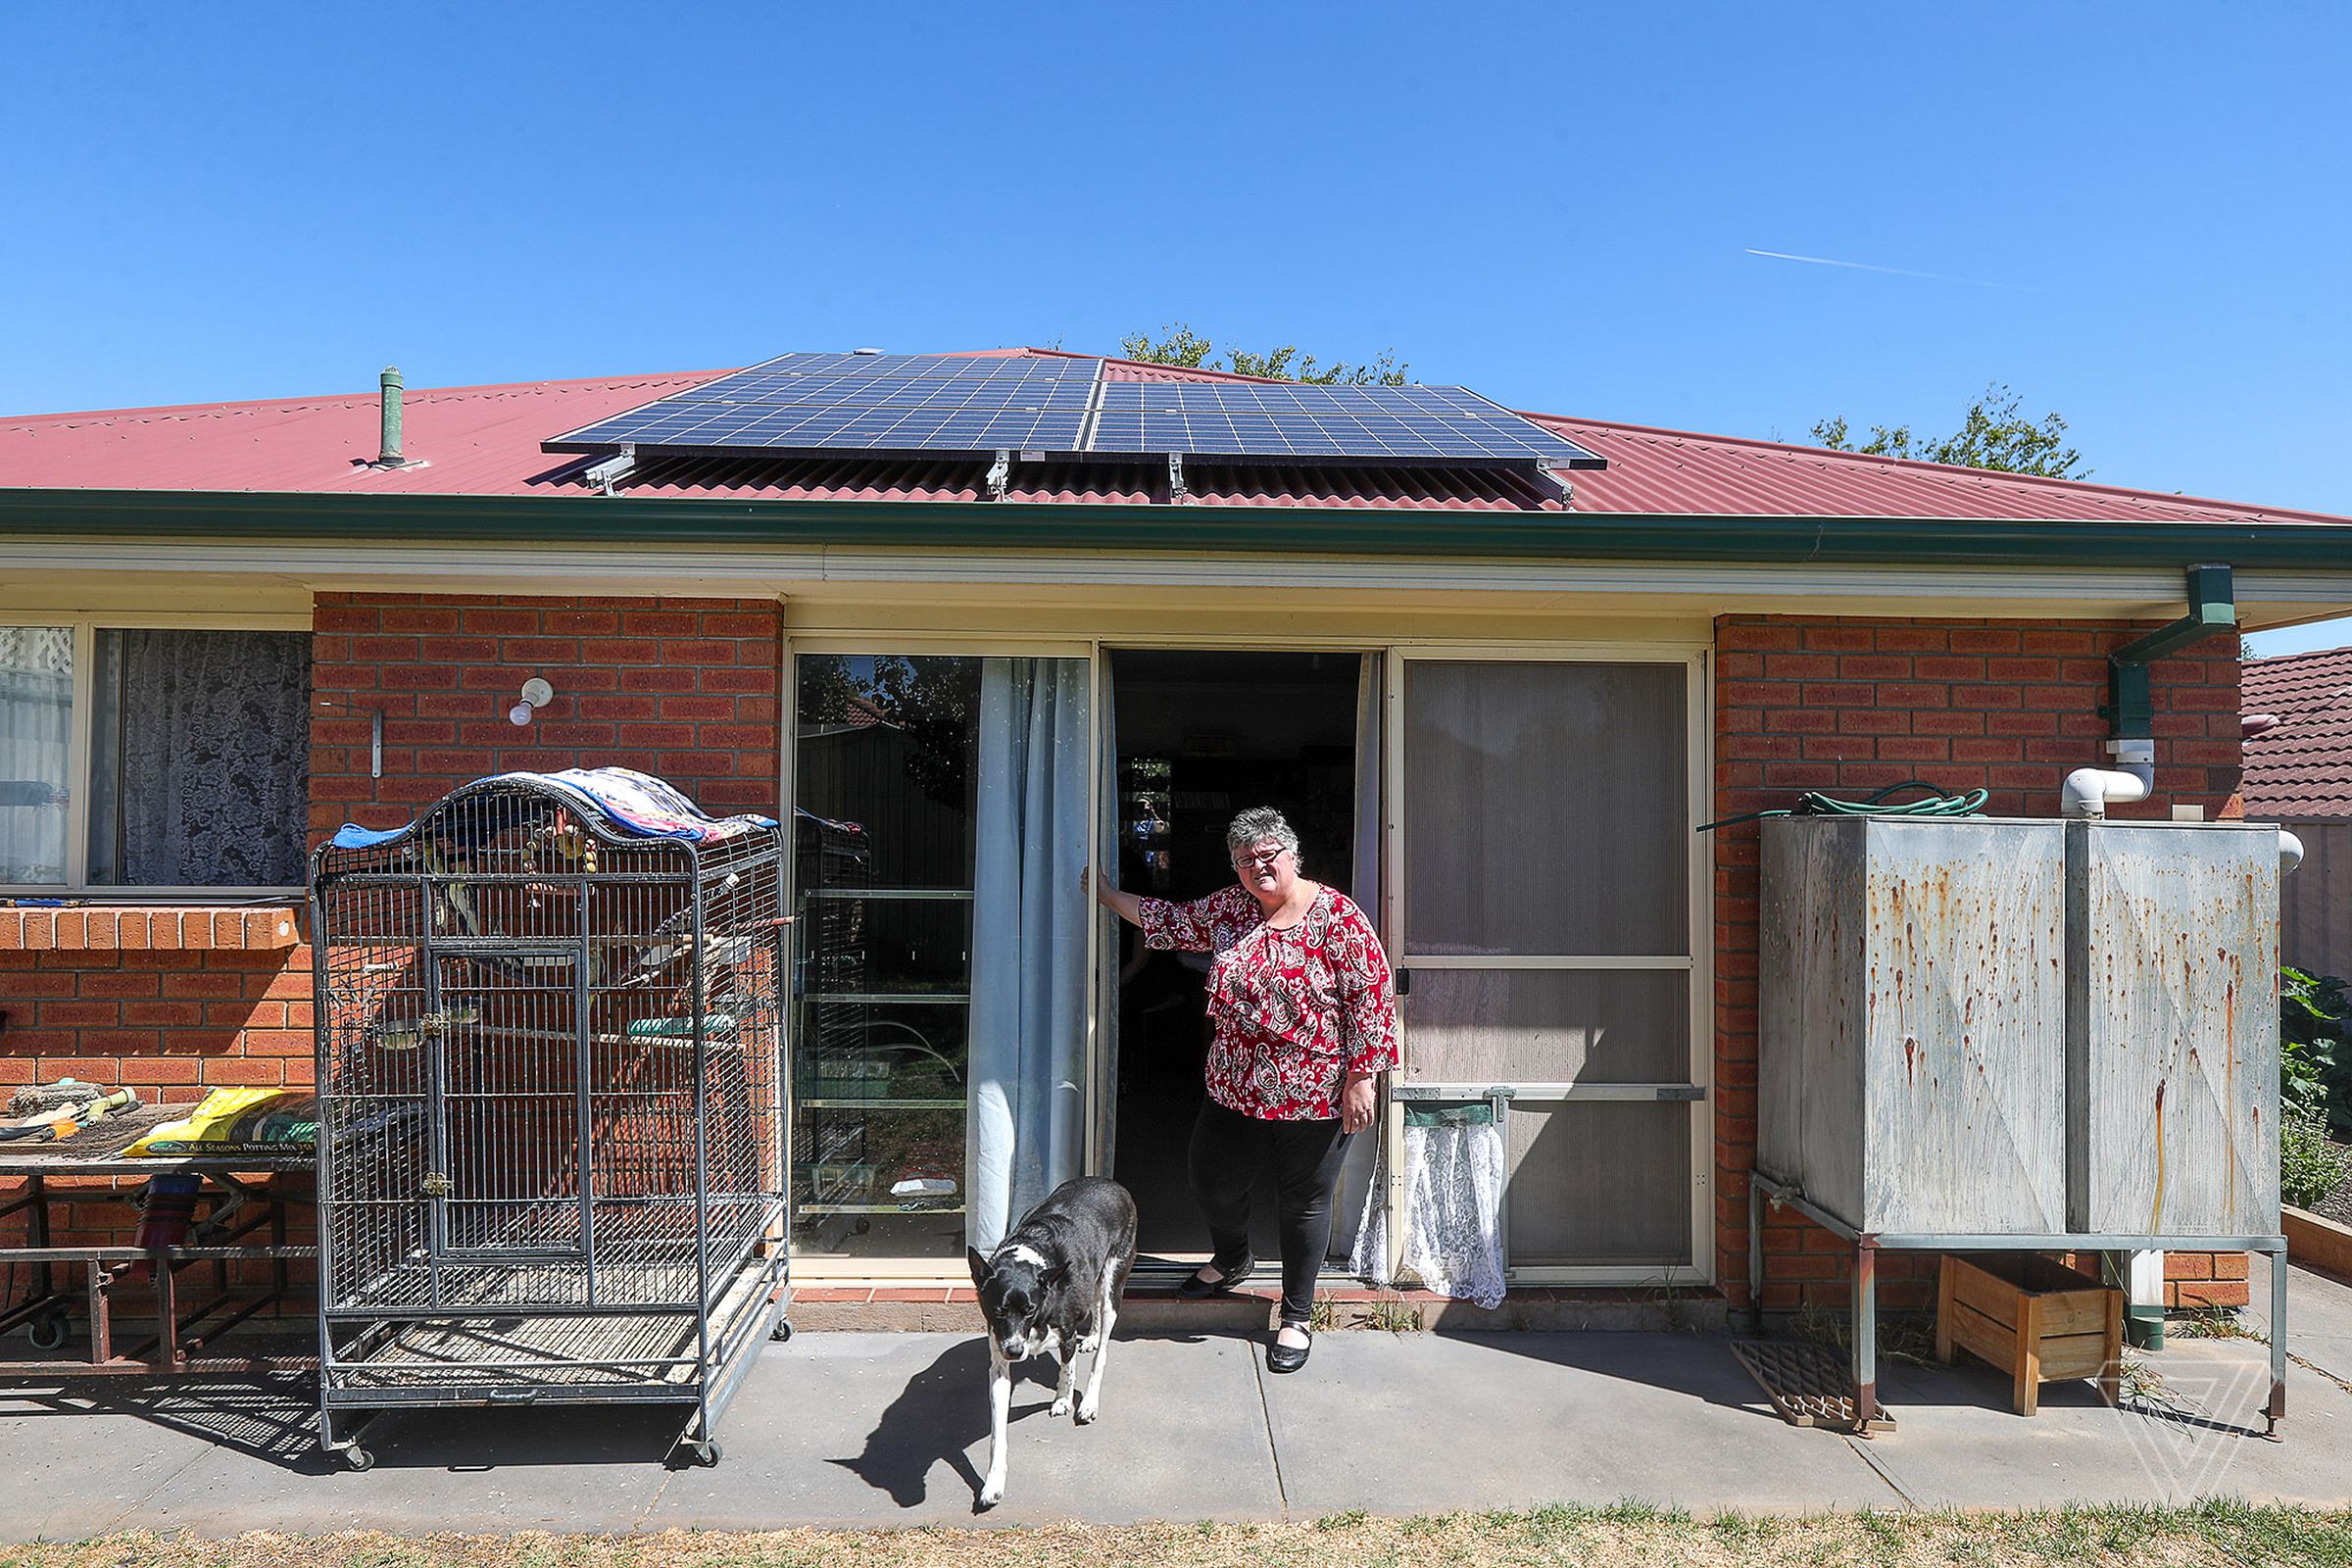 Sherallee Andrews has a Tesla Battery and solar panels at her home in Golden Grove, Adelaide, South Australia.